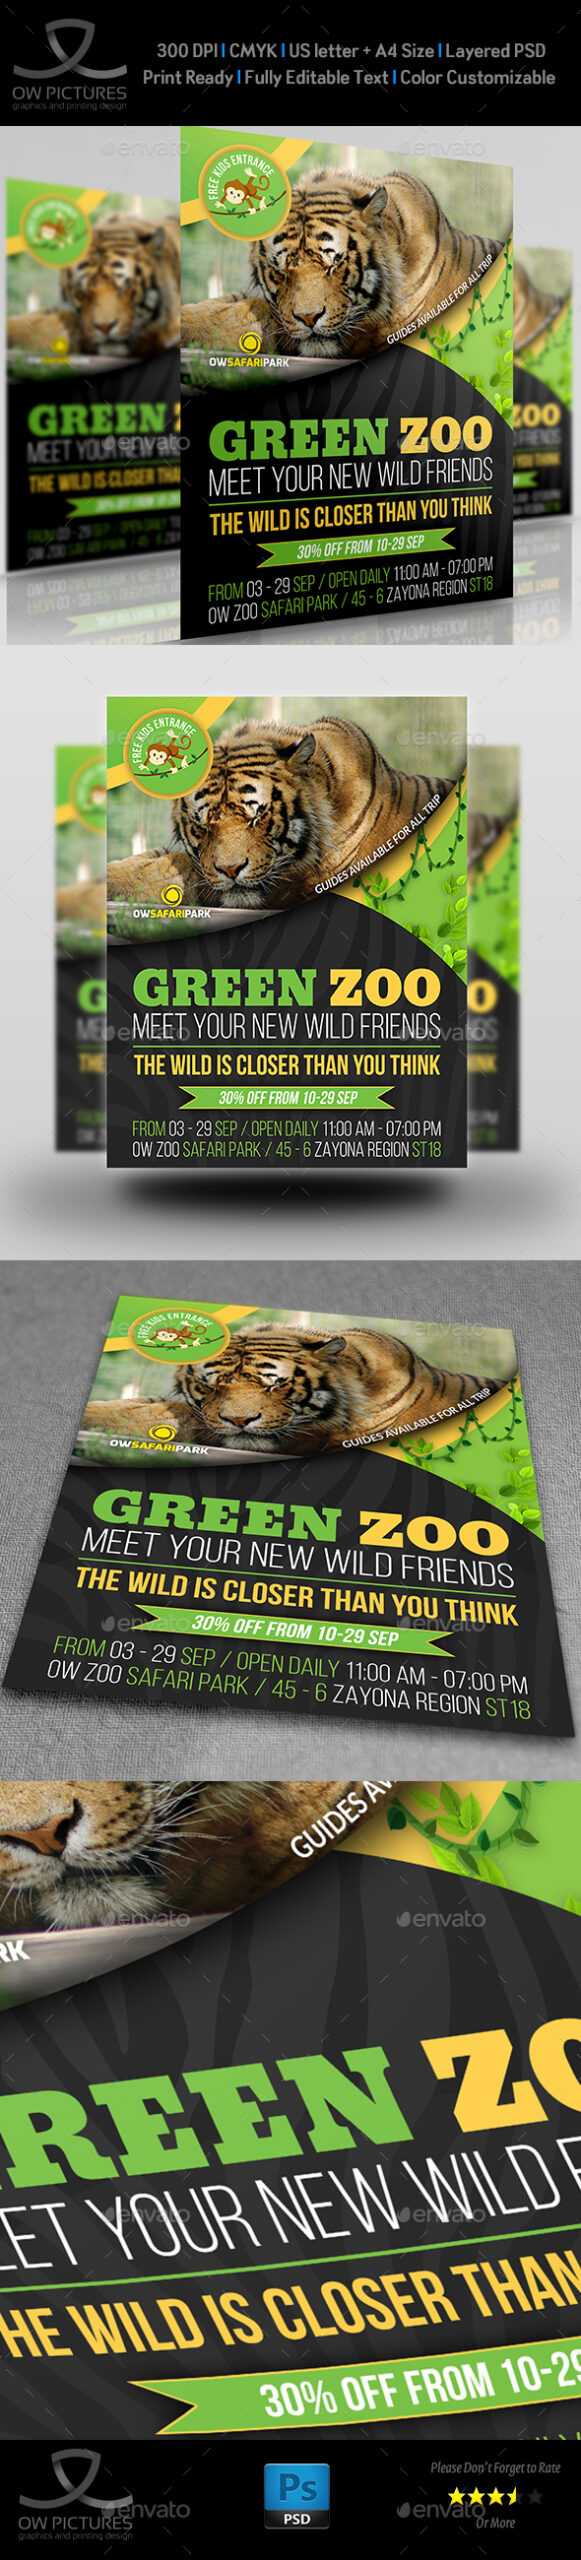 Zoo Flyer Graphics, Designs & Templates From Graphicriver Throughout Zoo Brochure Template